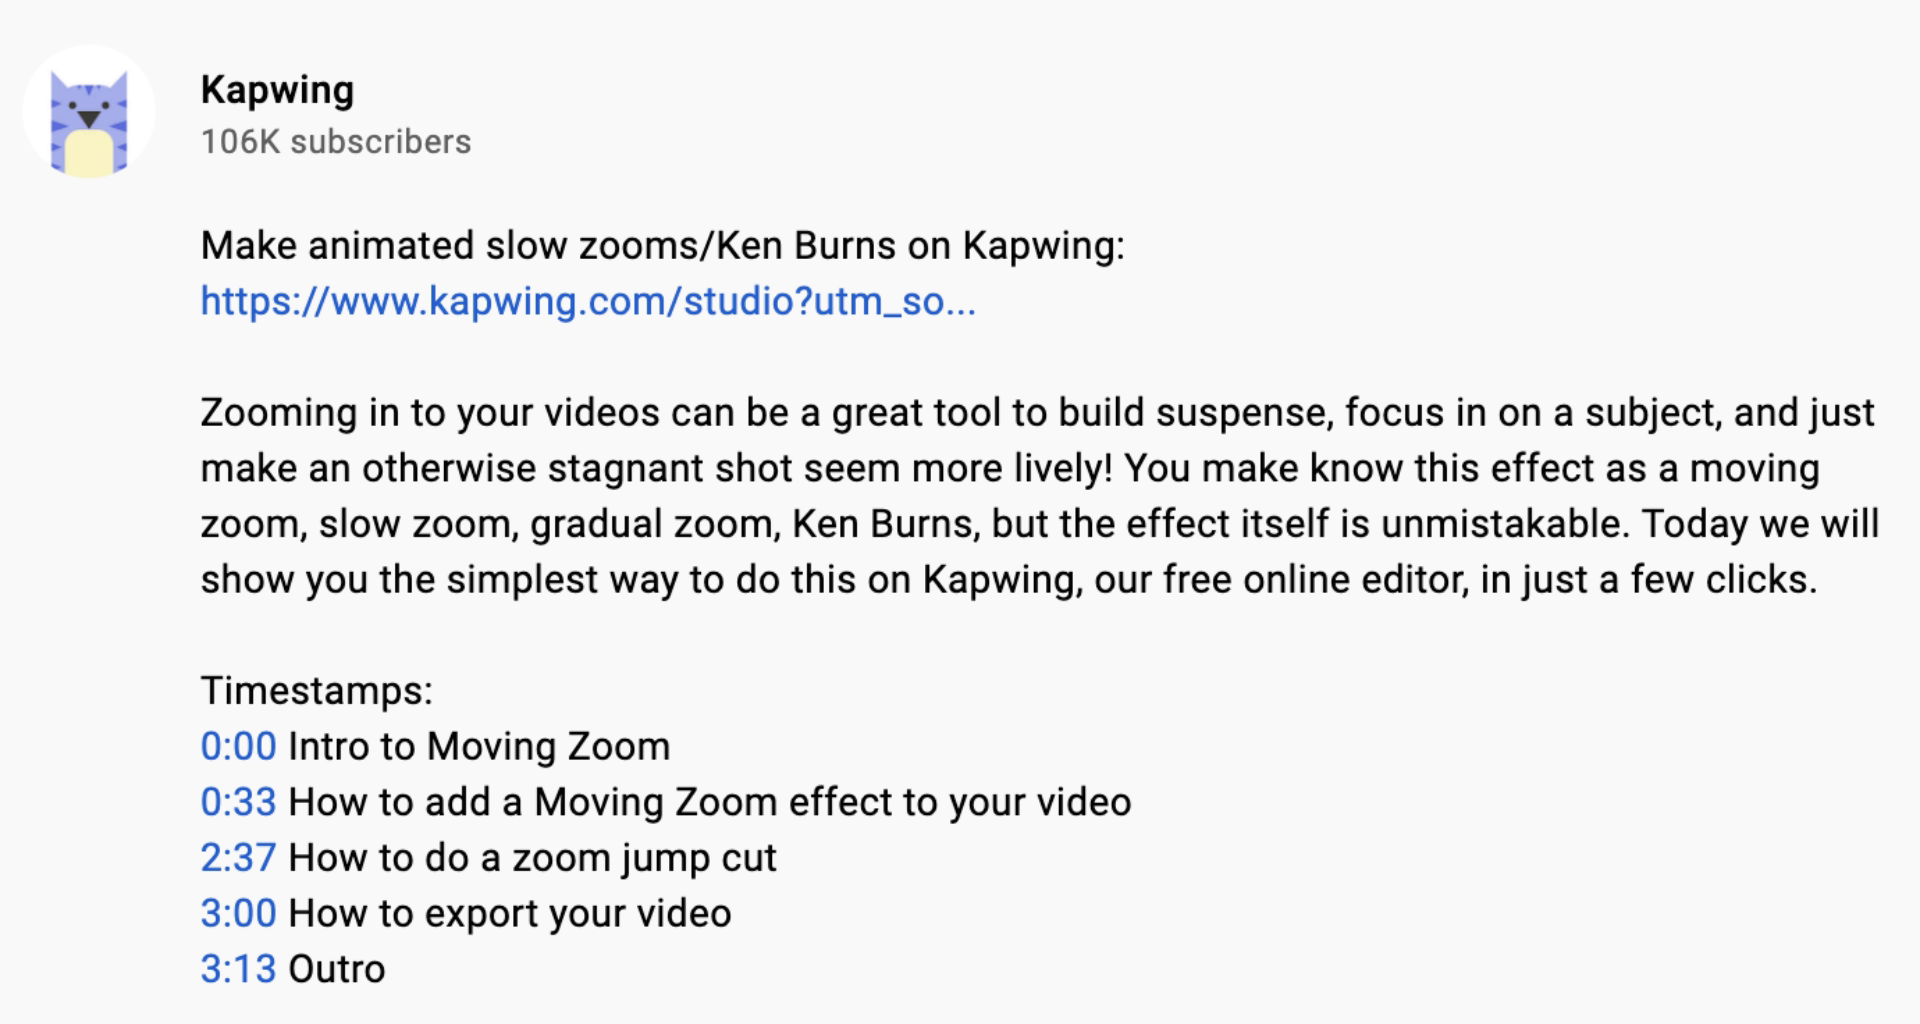 A screenshot showing the description of a Kapwing YouTube video with relevant timestamps